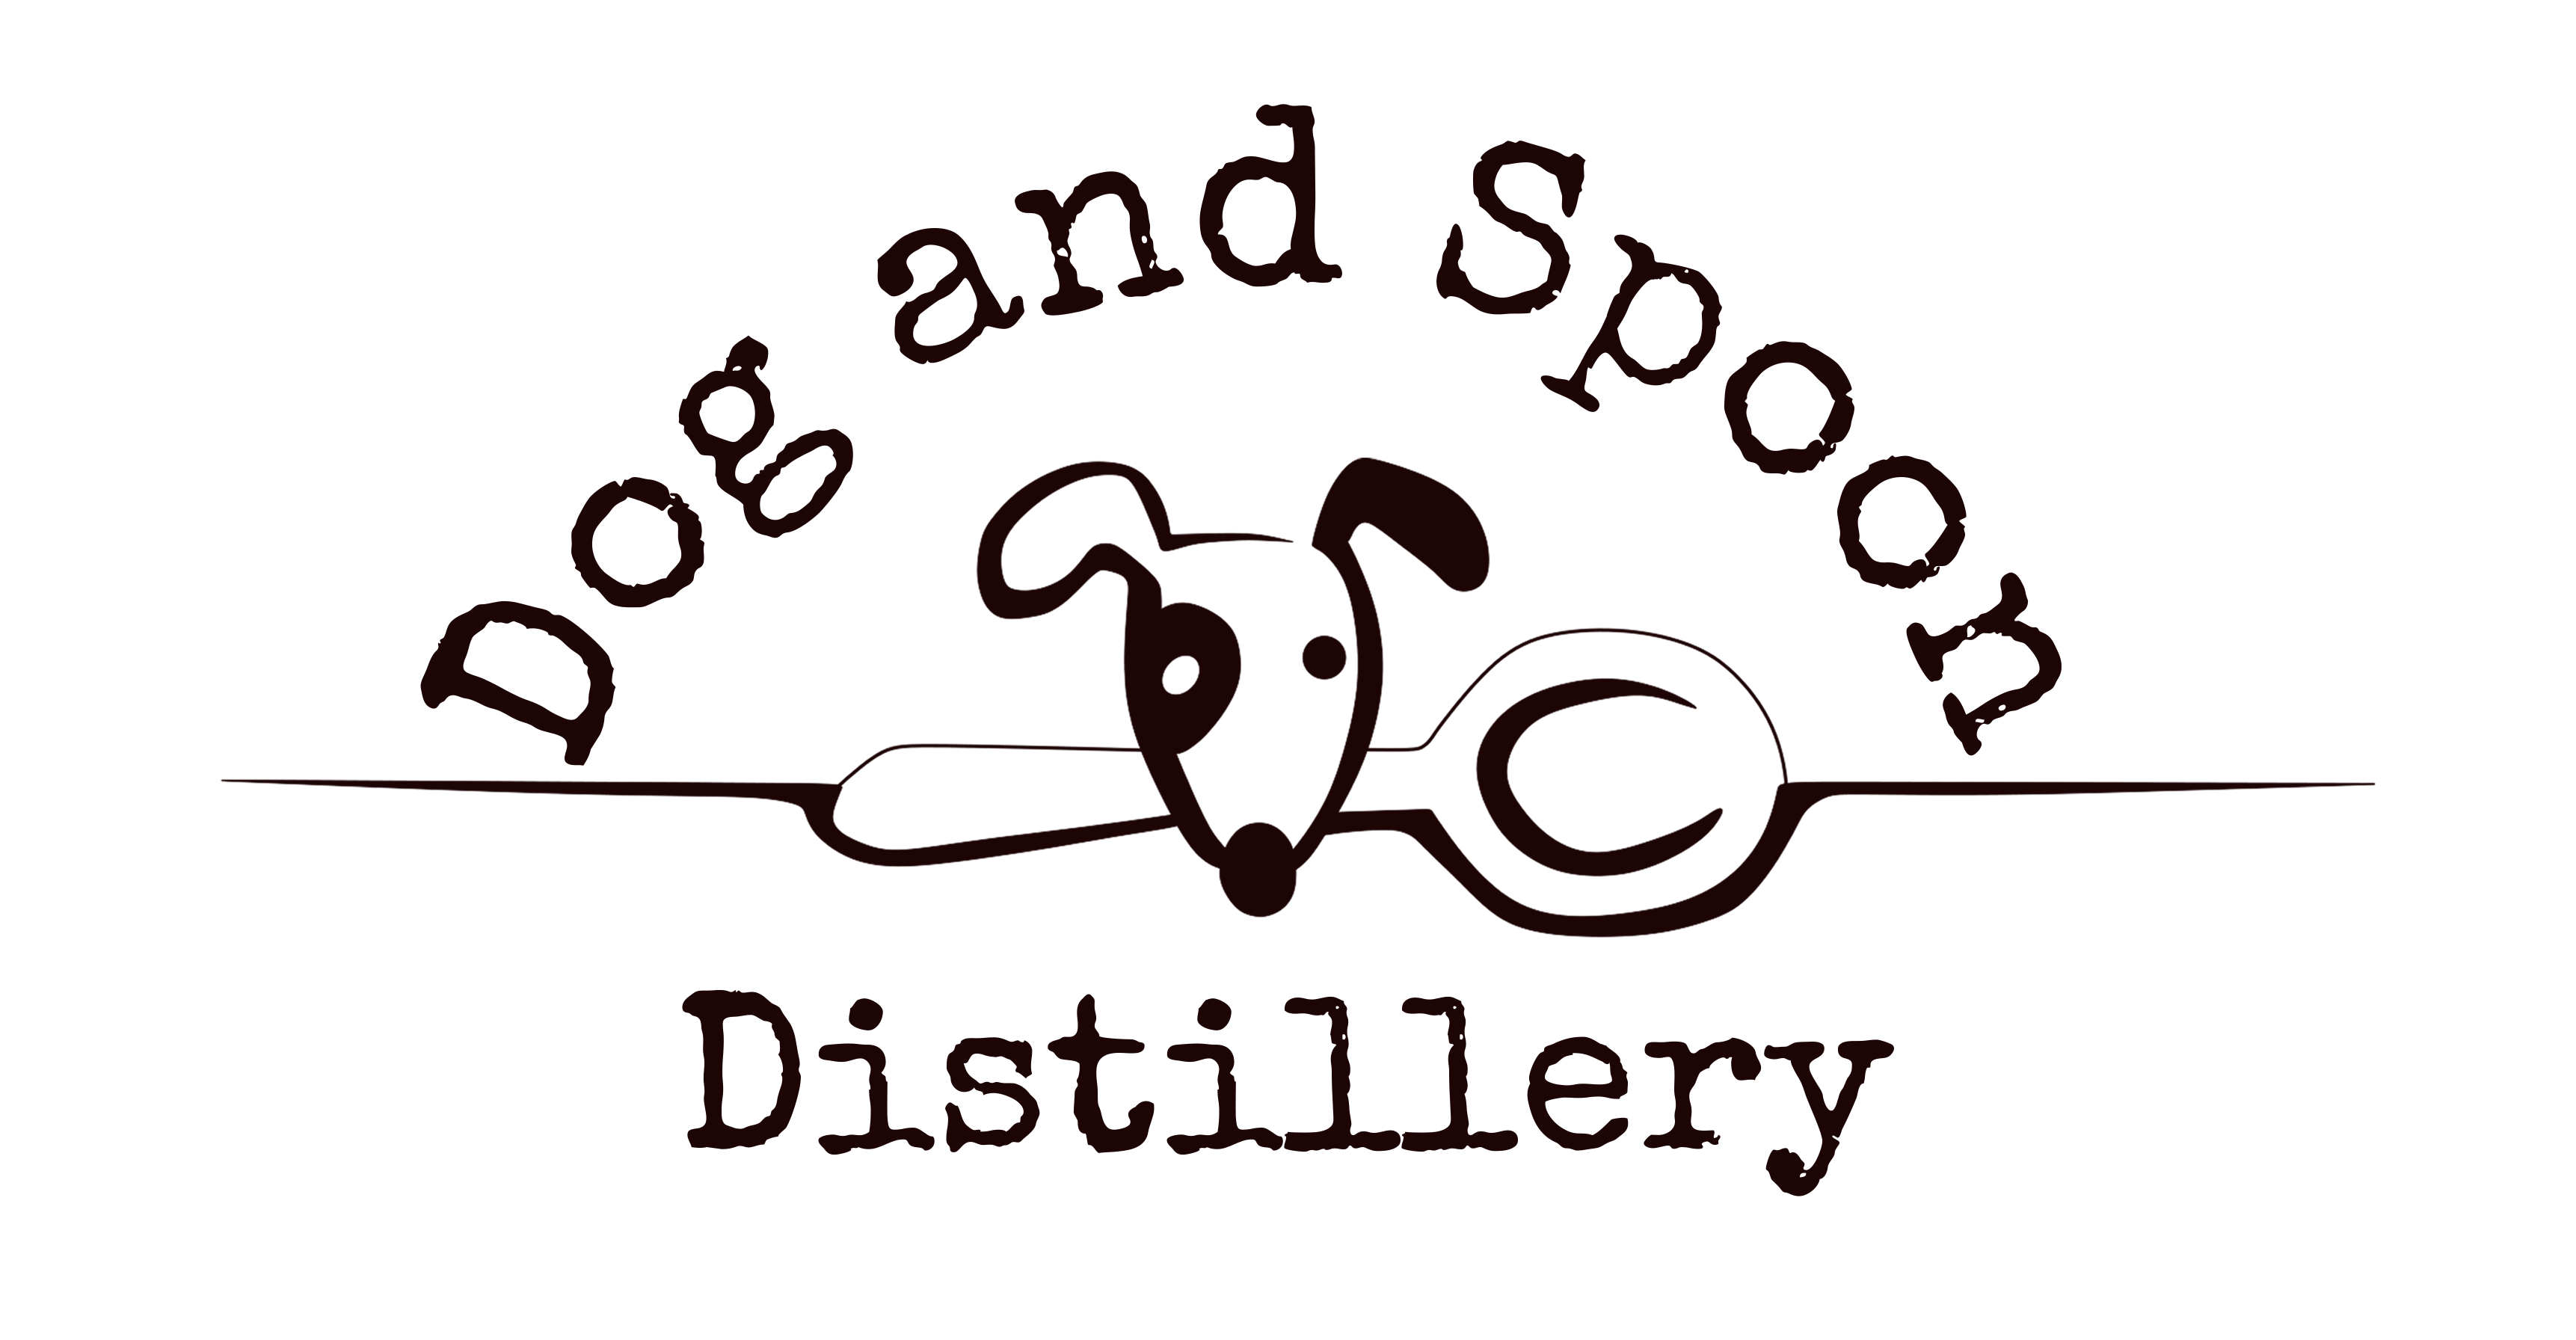 Dog and Spoon Distillery